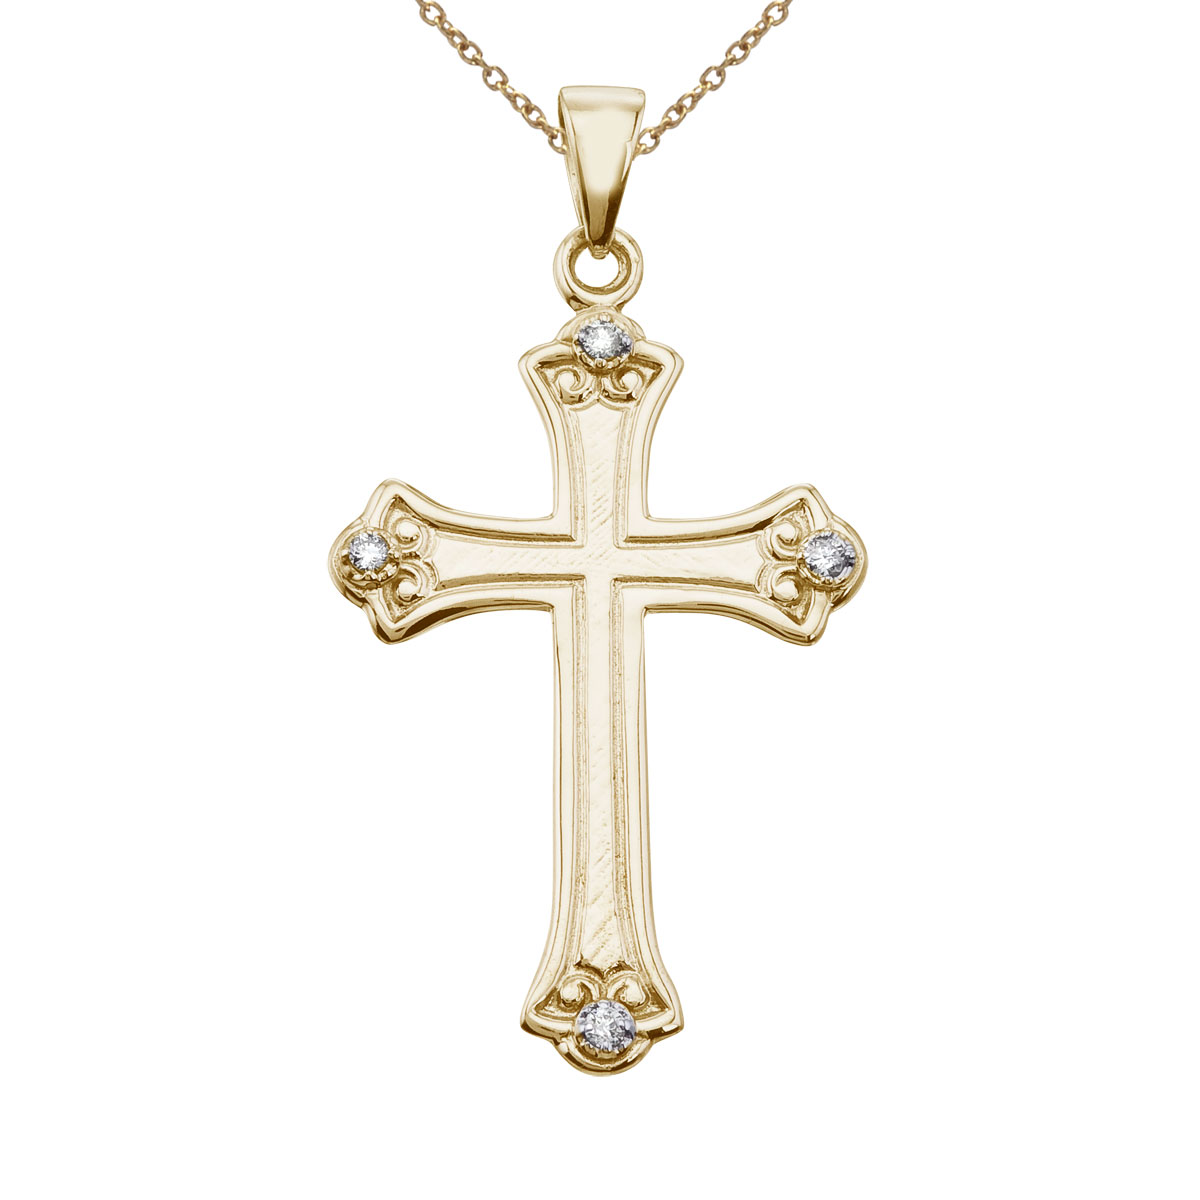 14k yellow gold cross. A great gift for all ages.